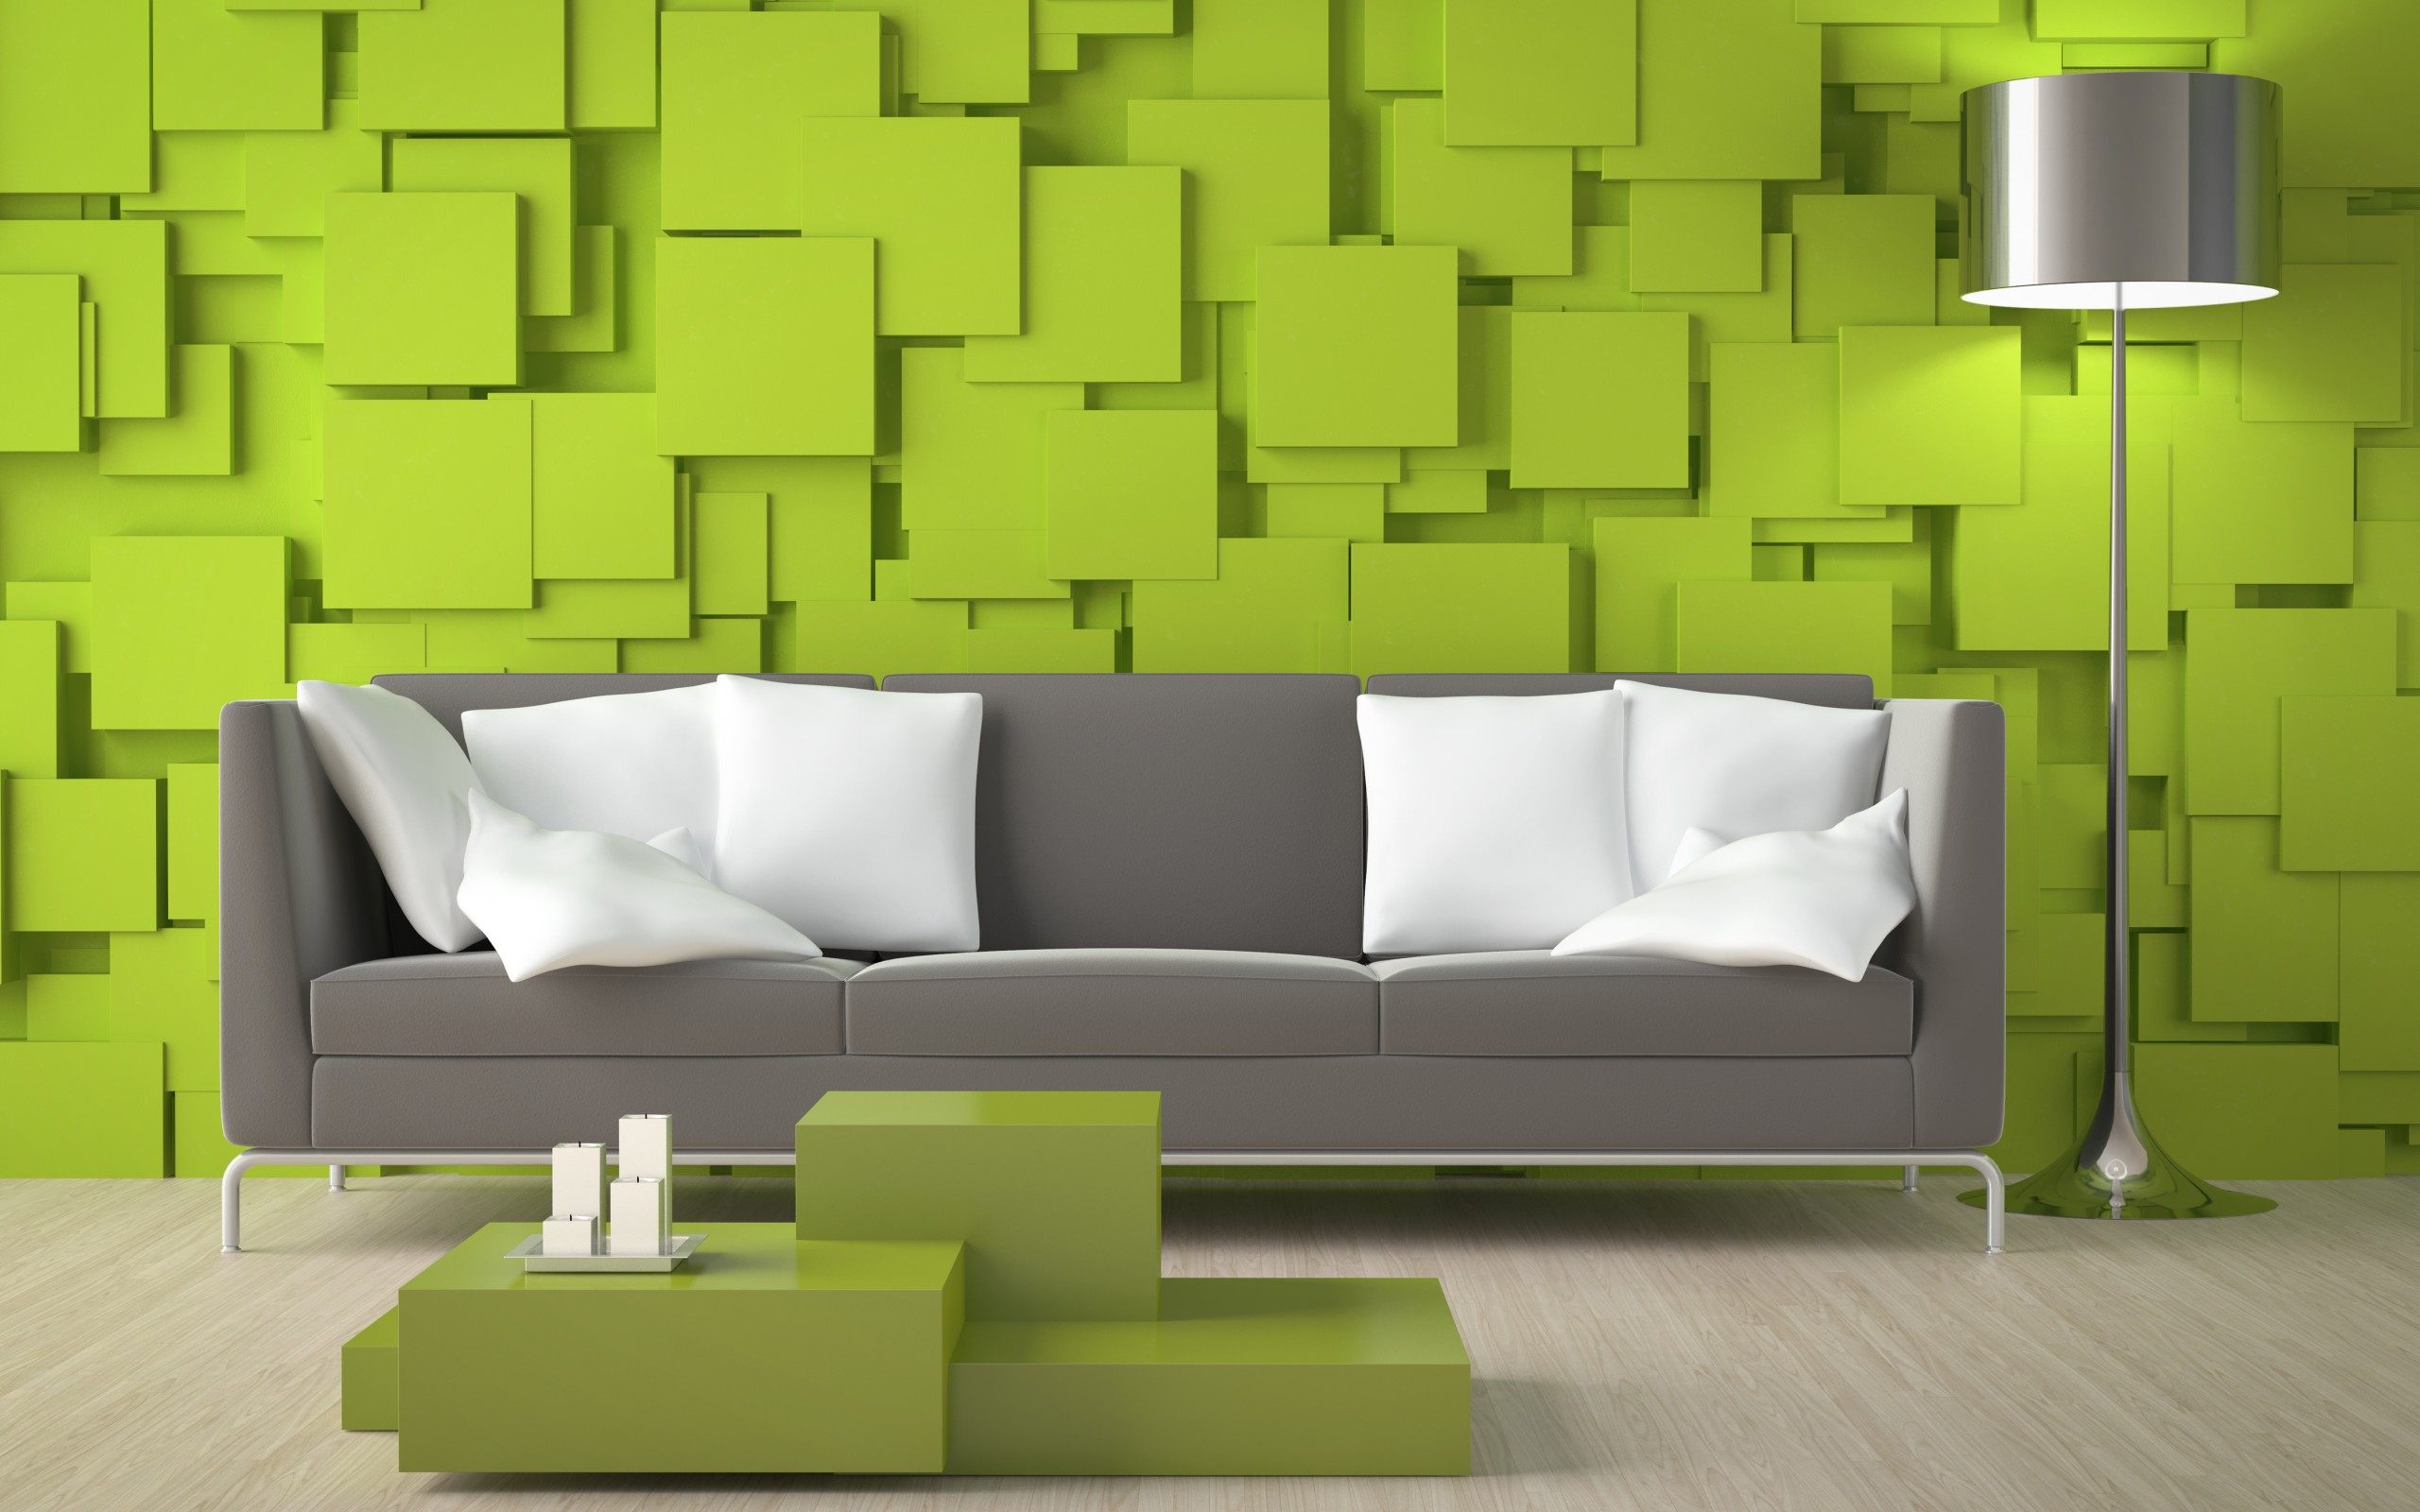 Wall Paint Design For Living Room - HD Wallpaper 